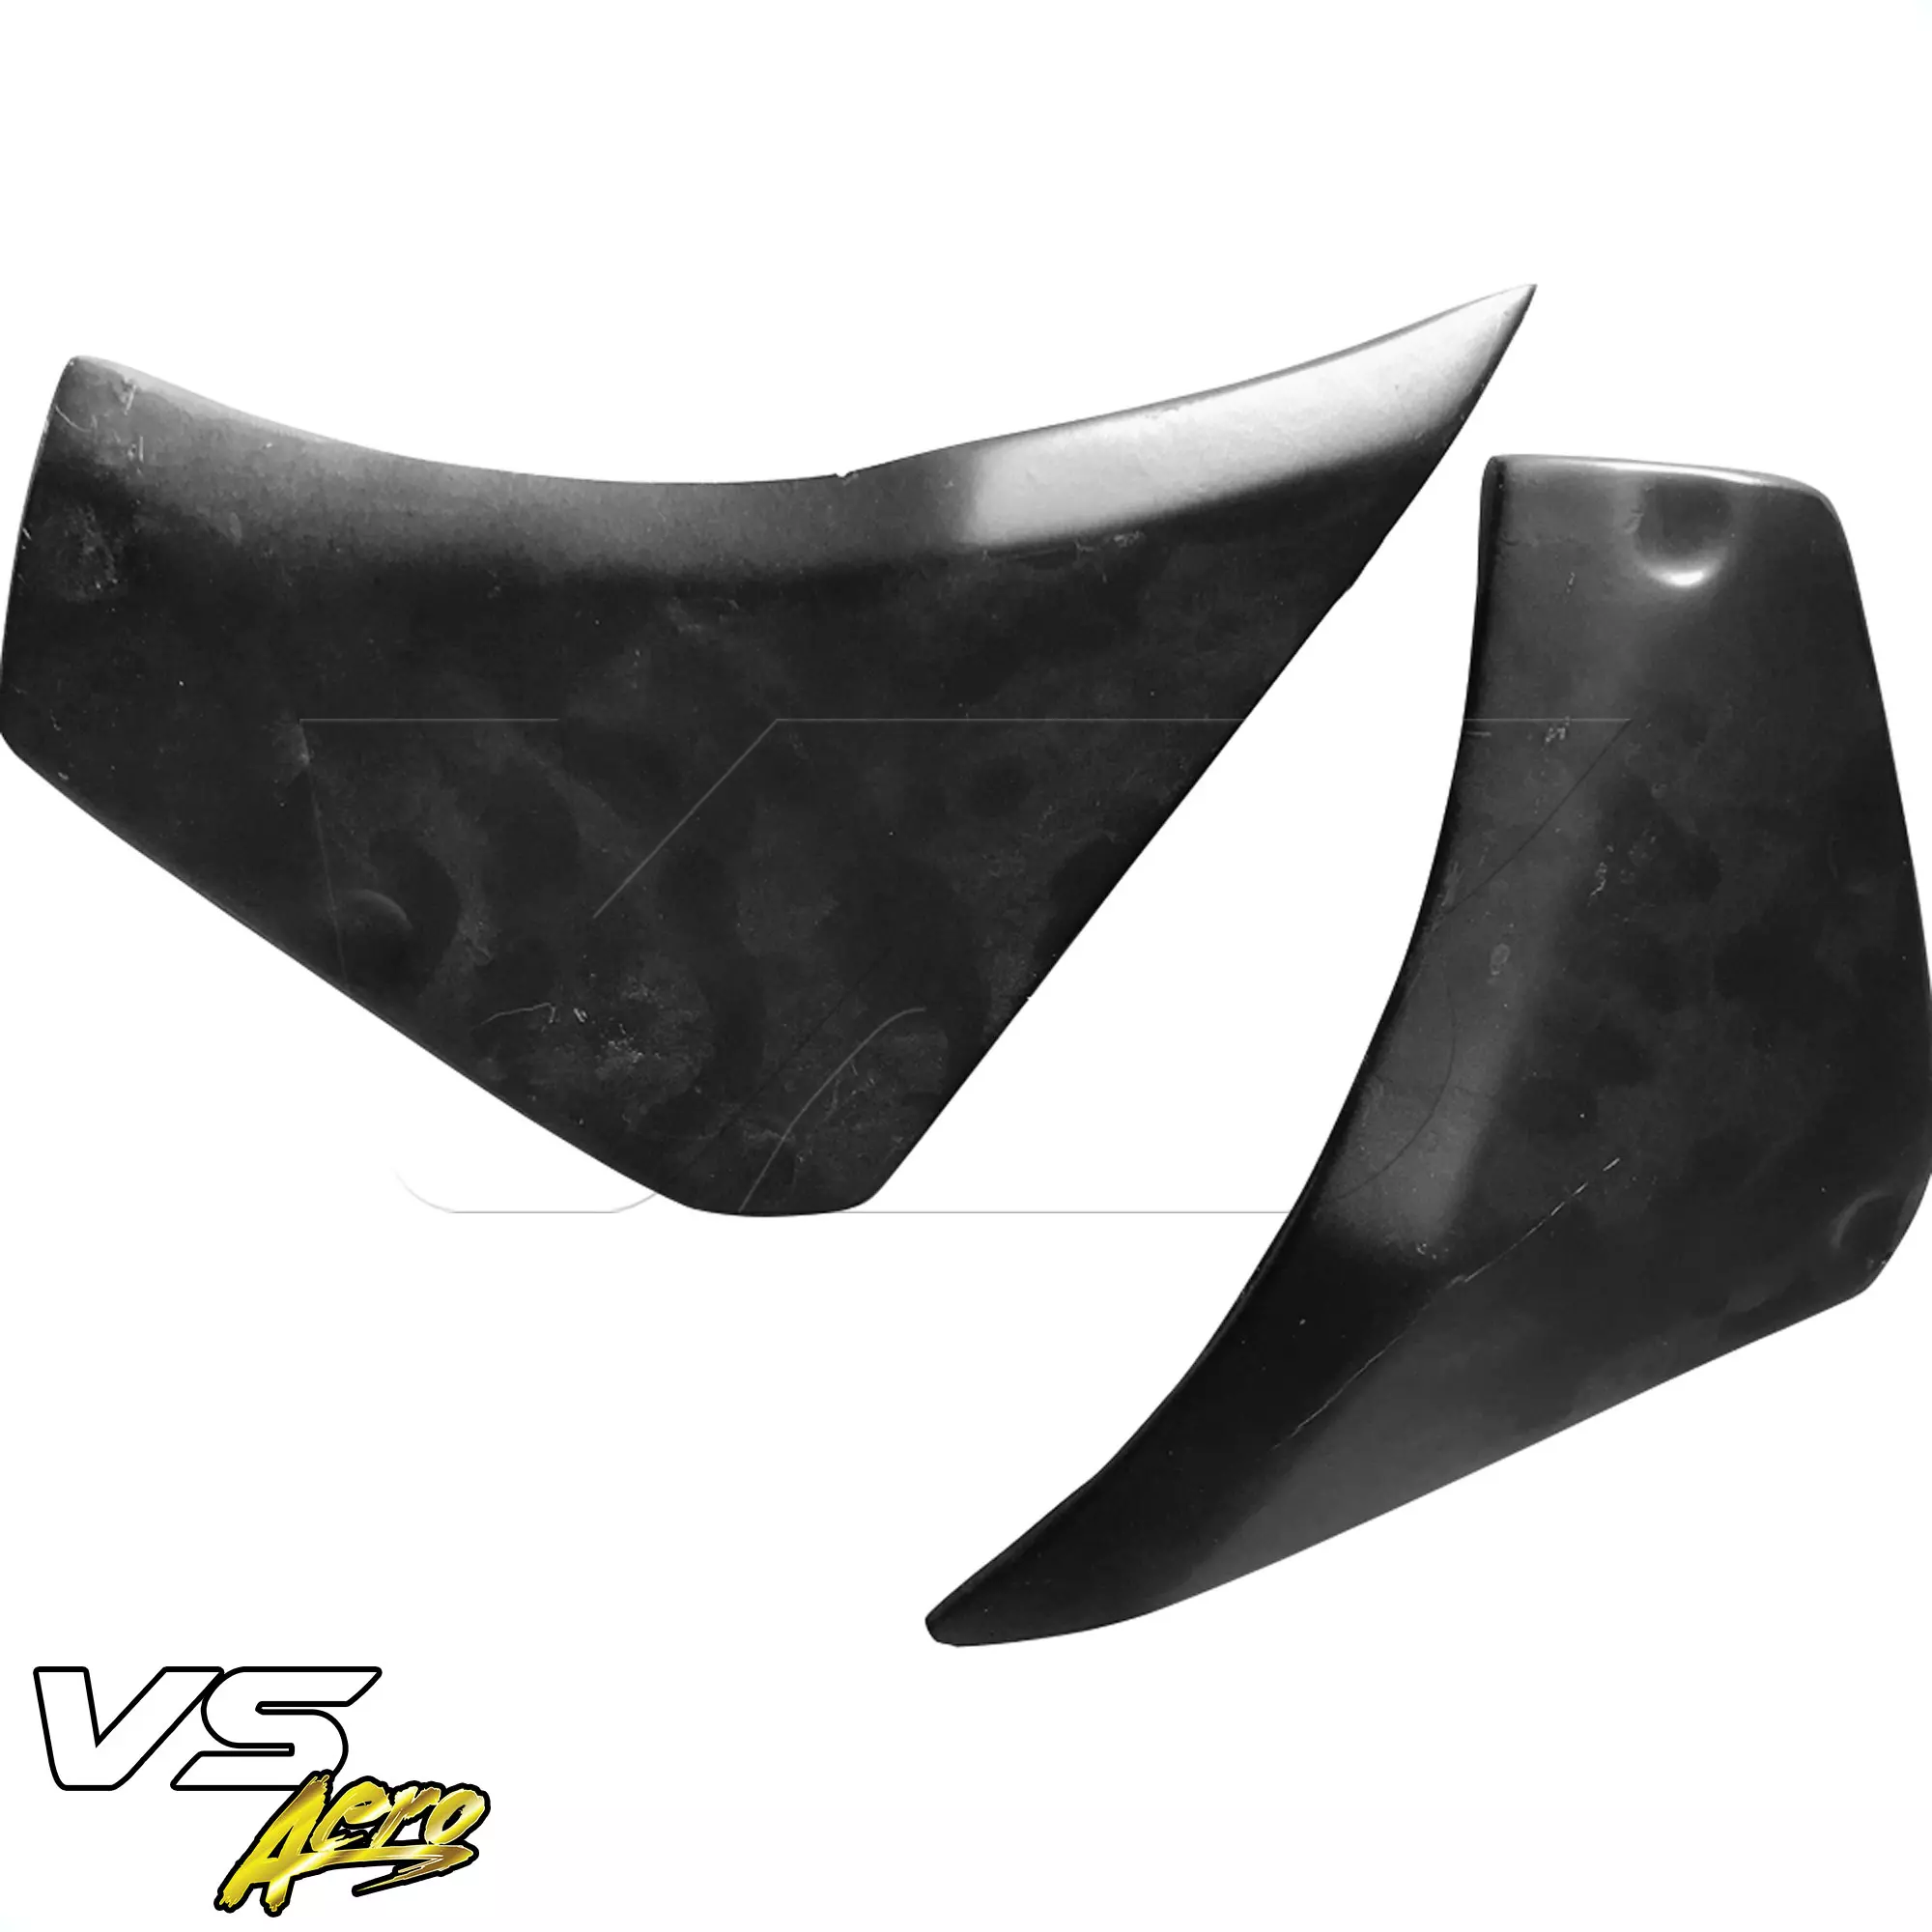 VSaero FRP LBPE Wide Body Fender Flares (rear) 4pc > Infiniti G37 Coupe 2008-2015 > 2dr Coupe - Image 24